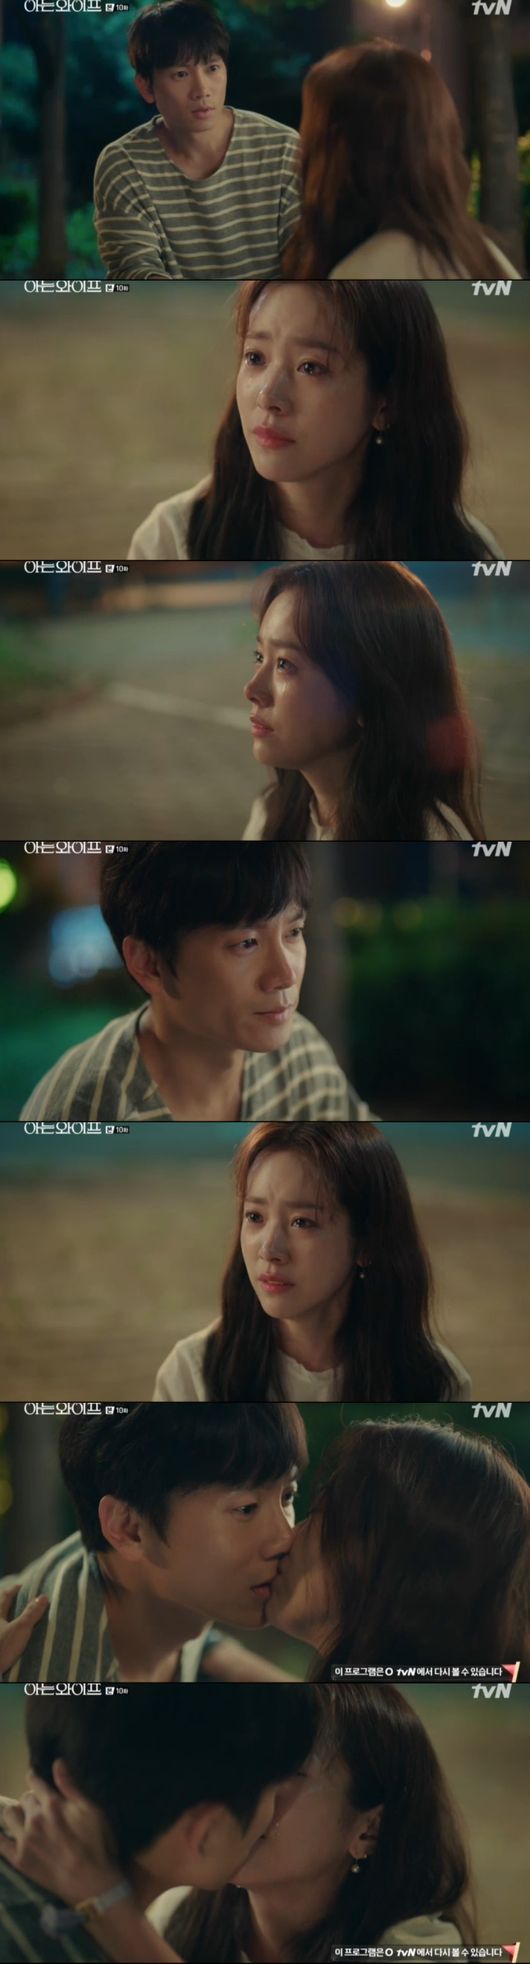 Han Ji-min kissed Ji Sung on surprise during Knowing Wife with ConfessionsIn TVNs drama Ai is a Wife (directed by Lee Sang-yeop, played by Yang Hee-seung), which was broadcast on the 30th, Woojin (Han Ji-min) told his heart to Ji Sung.HyeOne was disappointed when Joo Hyuk did not come to the appointment at the end, and then there was a big argument with Joo Hyuk who came home.Hye One said, You have changed, not you who were doing everything I said. Juhyuk was tired of saying, Do you have to pretend to die?Hye One left the house disappointed that she do not want to live with me in the appearance of Juhyuk, which she had never seen before.I asked Hyun-soo to take me anywhere, and I enjoyed the drive together and spent the night. On the next day, Hye One turned all the marriage photos with Ju-hyuk.It was as if he had expressed the closed mind of HyeOne.HyeOne sent Juhyuk a consultation request and Juhyuks luggage to Delivery, and Juhyuk called HyeOne, saying, Do you have to do this?Hye One said, I do not do this because I want to do this. I need someone who is not what I want and I can not live as you want, and I need someone who is more than anyone else.Joo Hyuk said it was all his fault.The news of Juhyeoks divorce was also told to the end and Woojin. Juhyuk was confused, saying, I do not know.I am in favor of Divorce, he said, and the two of them are not so good. After the end, he advised, Do what Juhyuk wants.Woojin kept his words, and looked at Juhyuk.He remembered Hye One saying, You have changed, you are not the same as you used to be, and then he called HyeOne again.But he didnt receive it. He looked at the end of his happy relationship with Woojin, just next to him.While working, he received a call from HyeOne, who was introduced to a business partner who had not been introduced to him during the publication ceremony.Ju-hyuk informed the manager of the report, and the manager thanked him for filling the quarterly performance in a single room, but Ju-hyeok was anxious. Woojin looked at Ju-hyeok and cared.Woojin went to Juhyeok and asked if he was having a problem with HyeOne. Juhyuk said, I do not care, I blame myself.Hye One urged Ju-hyuk not to take time. Ju-hyuk asked him to think about it once more.HyeOne dragged out a divorce by saying, I dont want to consume my feelings.After finishing his date with the end, Woojin accidentally witnessed Hye One and a young man (Hyunsu). Then he heard that Joo Hyuk and Hye One went to the law One, and went to the house with Ju Hyuk.Woojin was concerned about Joo Hyuk, who tried to eat Alone cup noodles, and on behalf of Woojin, the end prepared food, and there was an awkward feeling between Woojin and Joo Hyuk.The company held the Marathon competition; following Woojin, Joo Hyuk and Jonghu also arrived.When Woojin heard that he had fallen into a cardiac arrest among the Marathon participants, he worried that he might be Ju-hyeok.I thought the person in the ambulance was Juhyuk, but fortunately it was not Juhyuk. At this time, Juhyuk appeared in front of Woojin, and Juhyuk asked, What is it, do you know?Woojin wept with relief, and felt more confused in his mind.After Marathon, he had a dinner party. Woojin calmed him down with a drink. Joo-hyuk looked at Woojin.While Joo Hyuk was out to answer the phone, he saw Woojin, who was drunk, blowing outside. They decided to break alcohol at the playground separately.At this time, Woojin fell down: Joo Hyuk asked, Woojin! You okay?Woojin said, Its not okay, its not okay. I know its not okay or not, but I did not do it from the beginning. I was like I was broken, I wanted to go blind, I wanted to be swollen, I was comfortable and dependent.I just do not know everything, conscience, guilt, and I just do not know one thing, I like the deputy a lot, he said with tears.Joo Hyuk refused to say, No, no, we can not, and Woojin pulled such a ju-hyuk and kissed him.Capture the broadcast screen of Knowing Wife